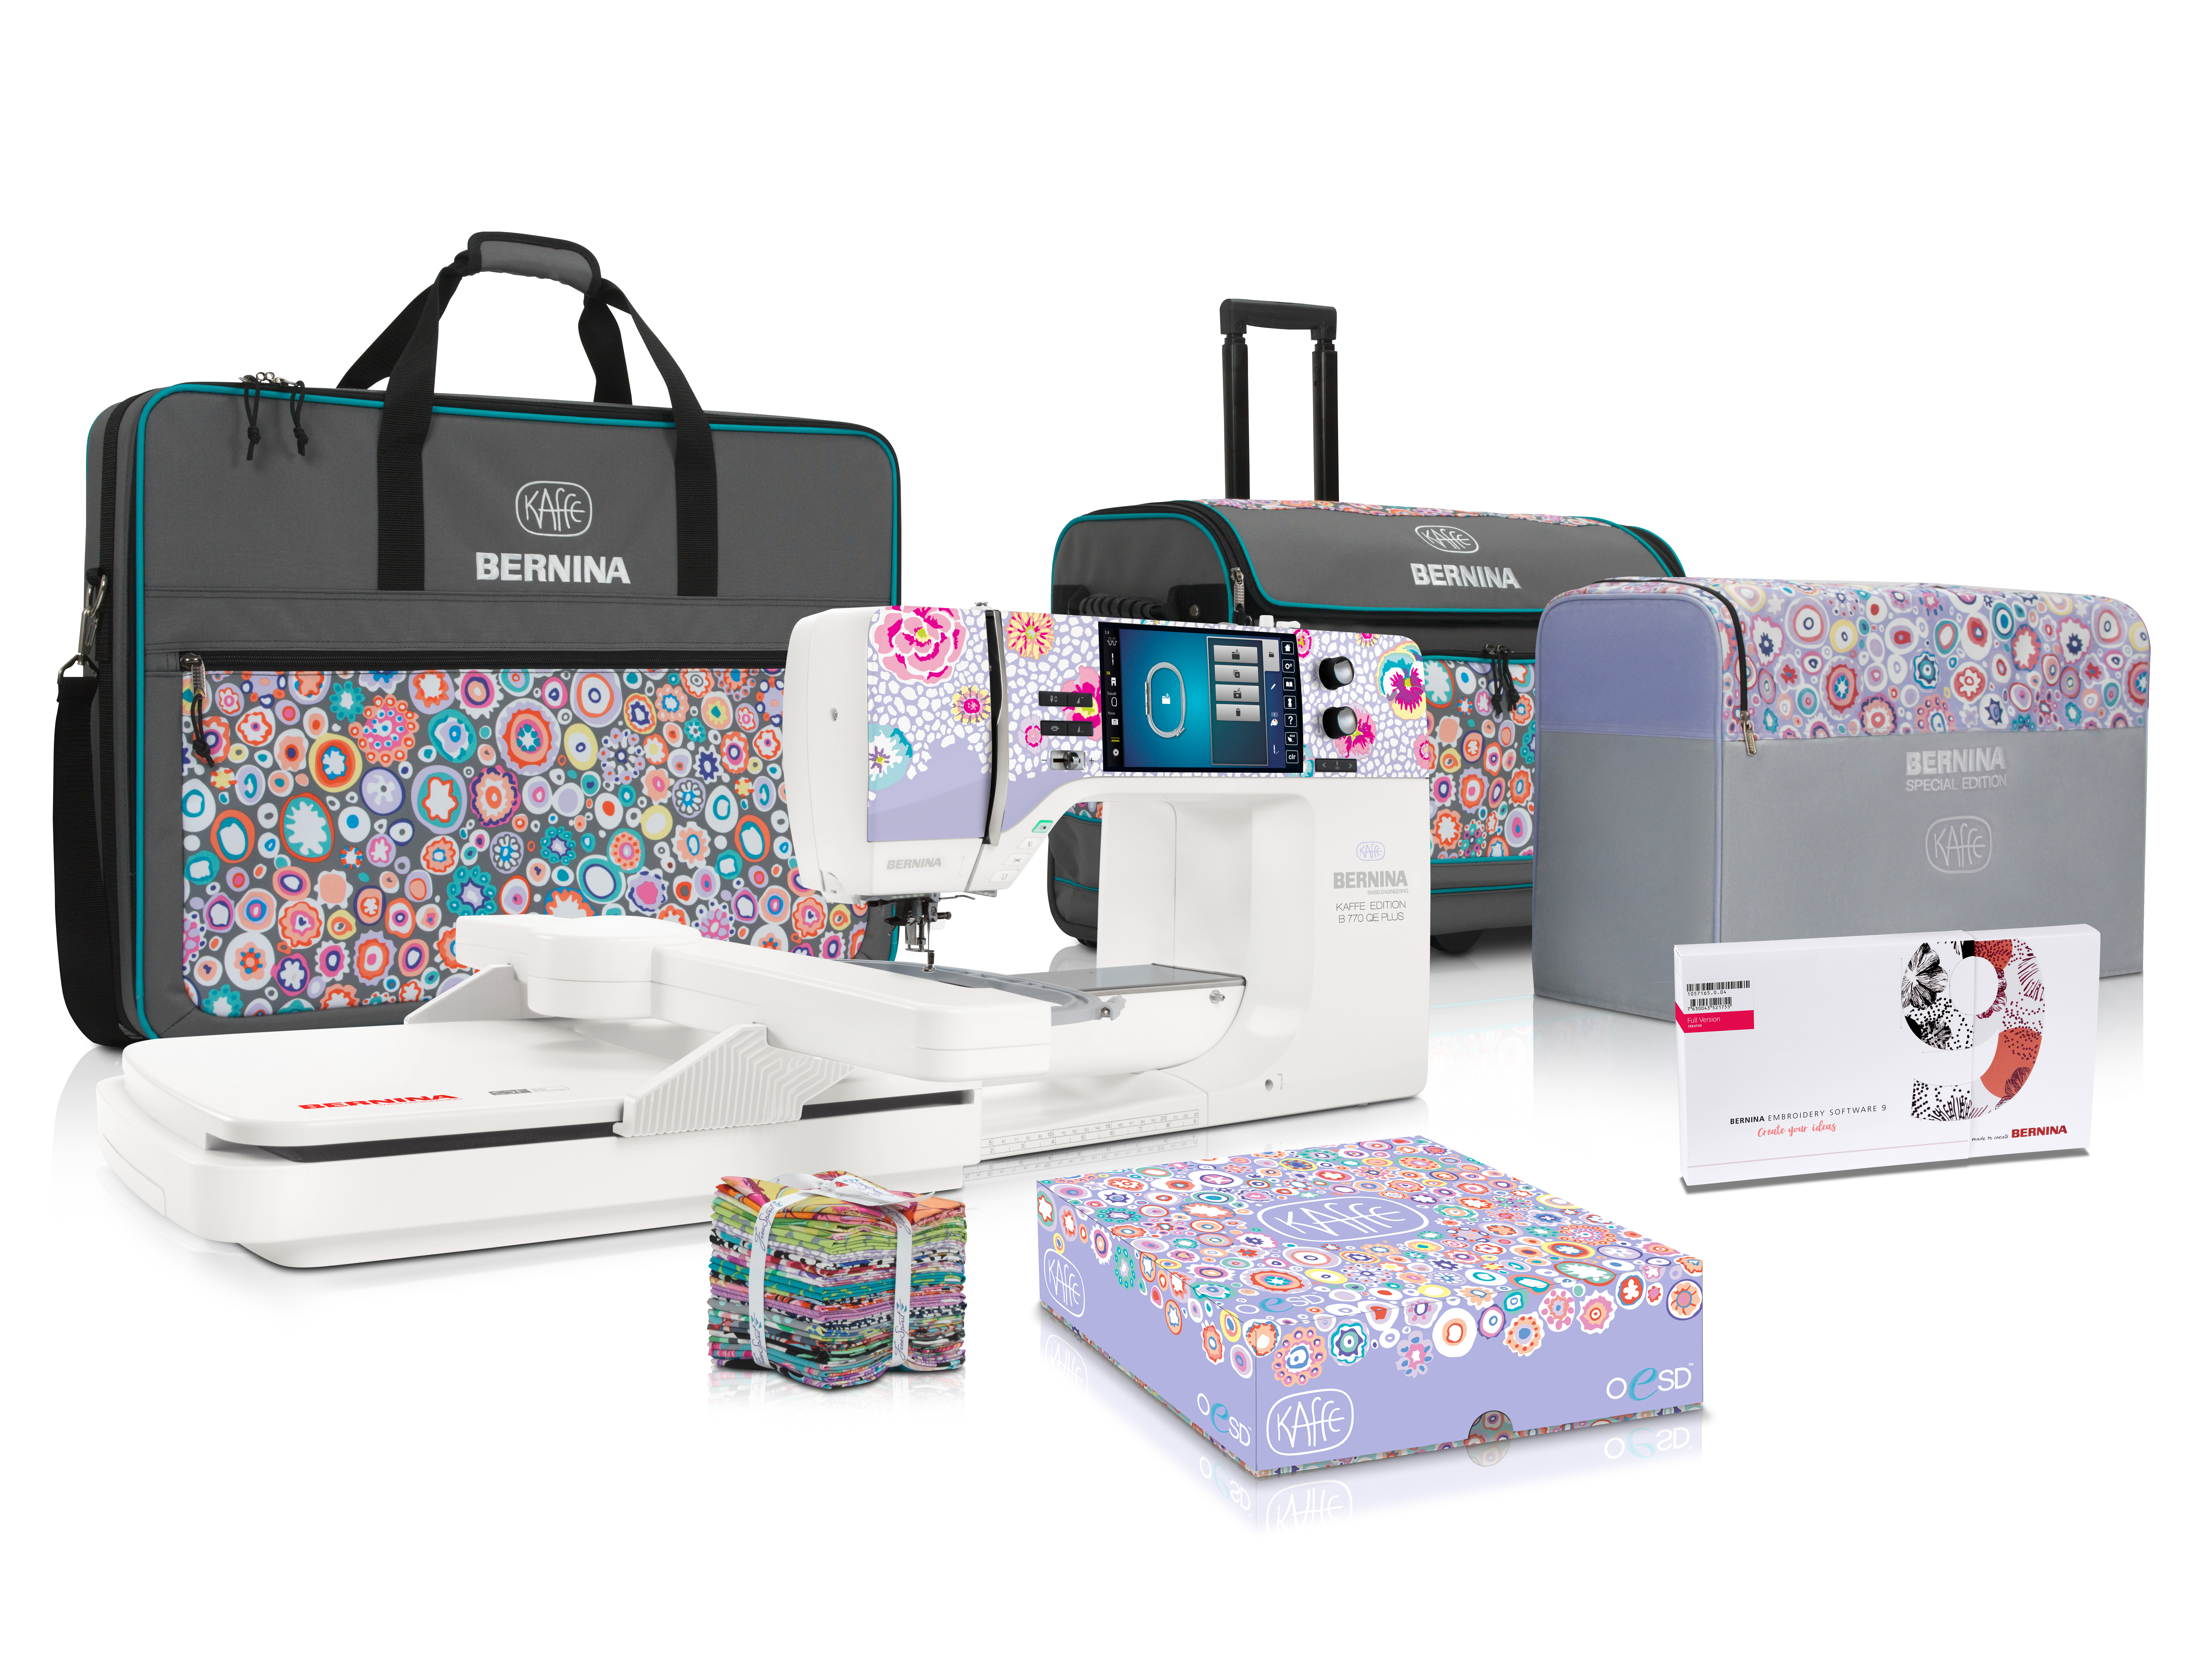 Brother SE600 Sewing and Embroidery Machine Bundle Guinea